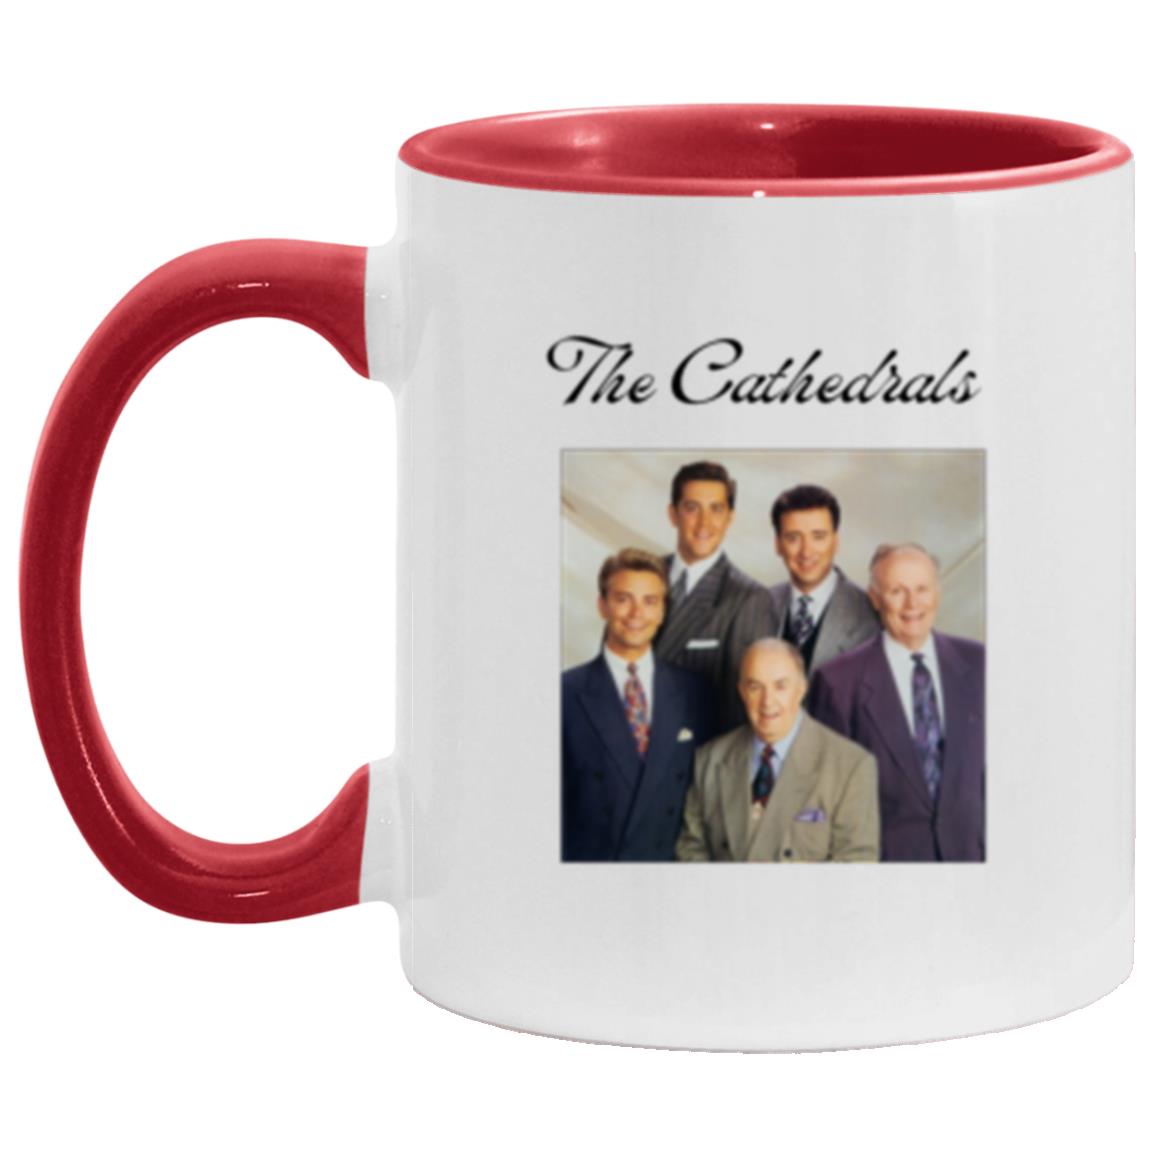 The Cathedrals Coffee Mug